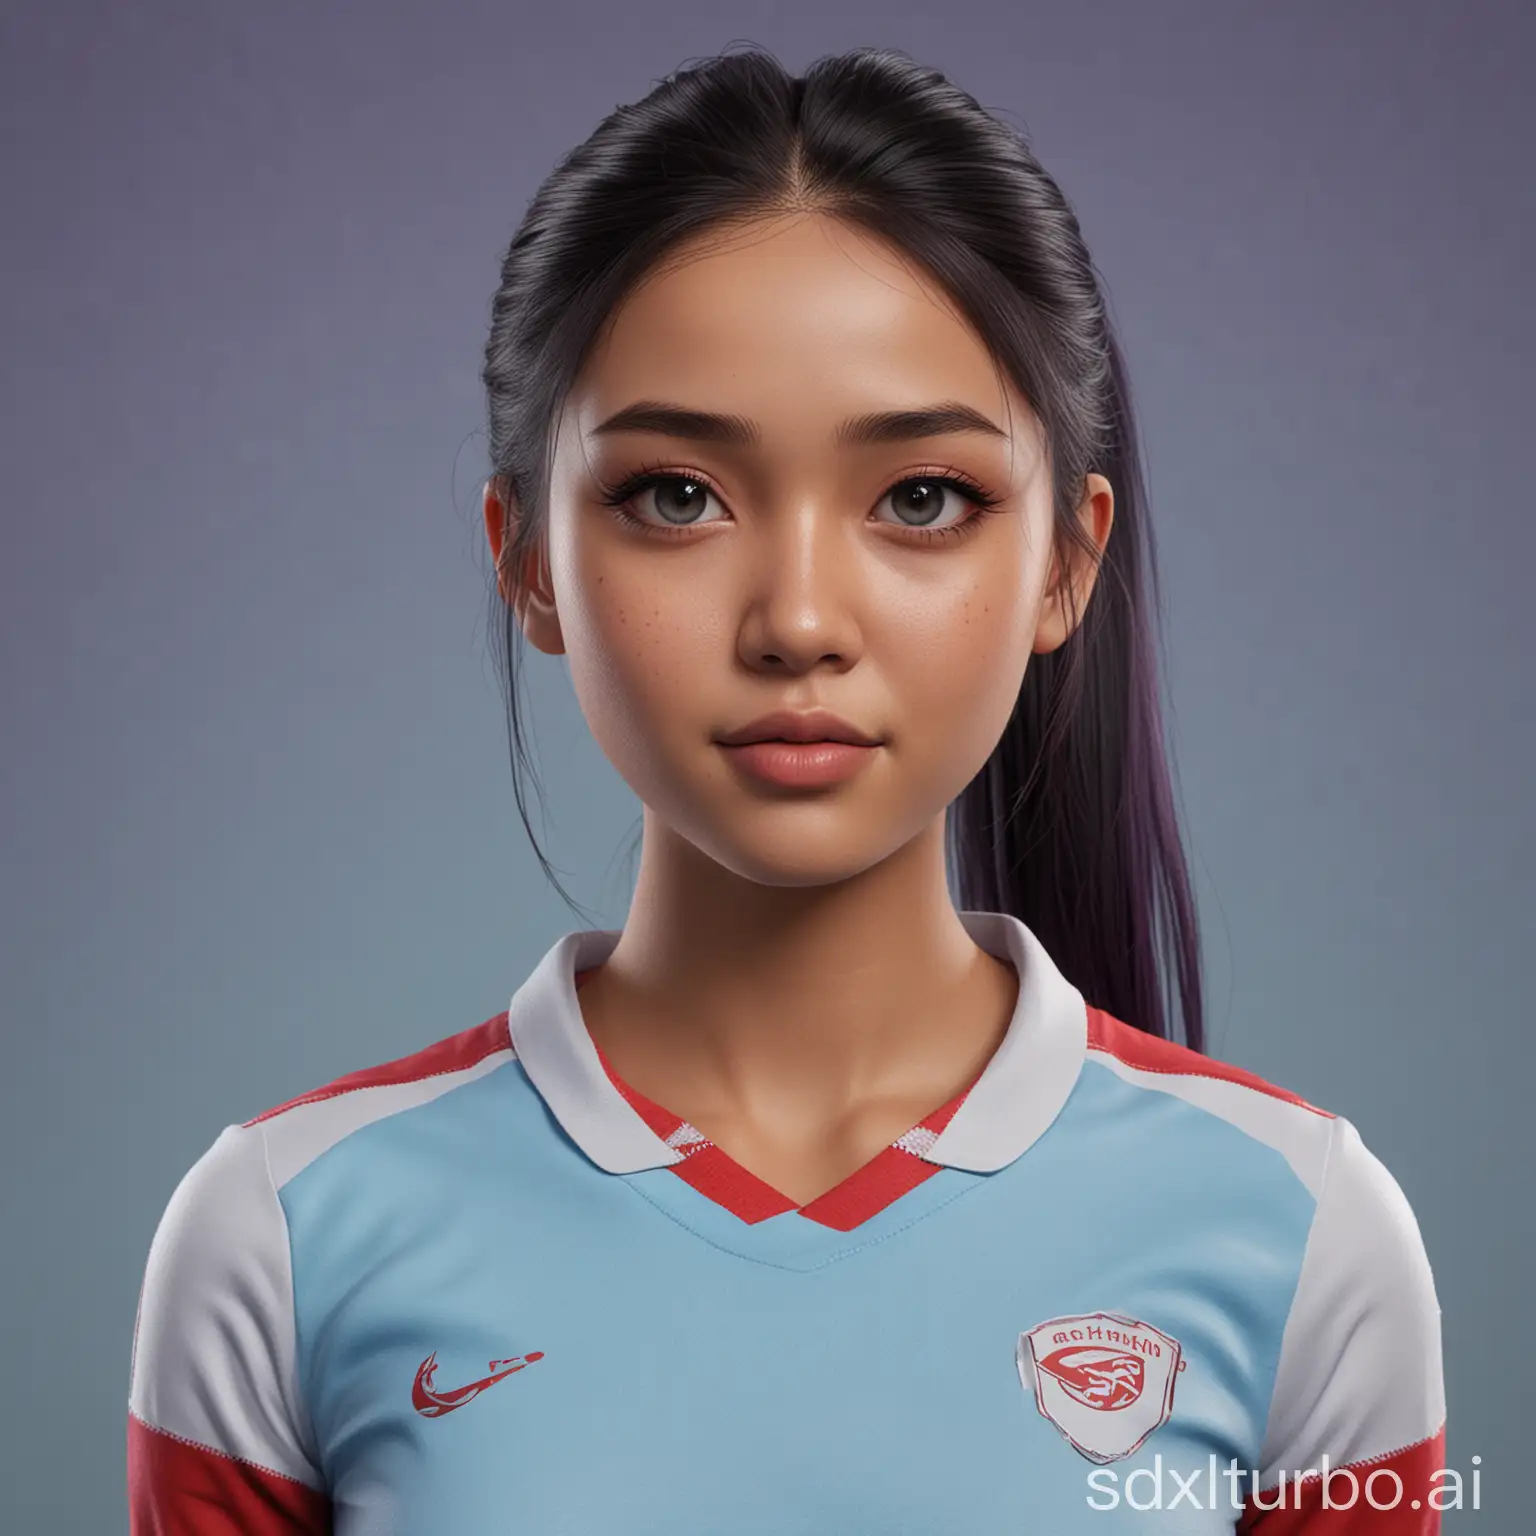 [Create a character 3D animation realistic full body with a big heads. A 20 year old Indonesian woman. Tall, slim, long ponytail hair style with a middle part, beautiful and neat eyebrows, beautiful eyes, sharp nose, beautiful lips, faint smile. Stand at an angle, eyes straight facing the camera. Wearing a sports jersey which is predominantly white with light blue accents on the left sleeve and purple on the right sleeve and red on the edge and collar of the shirt. Soft blue gradient color background. Very realistic image, 3D, UHD, 16K, good and natural lighting].